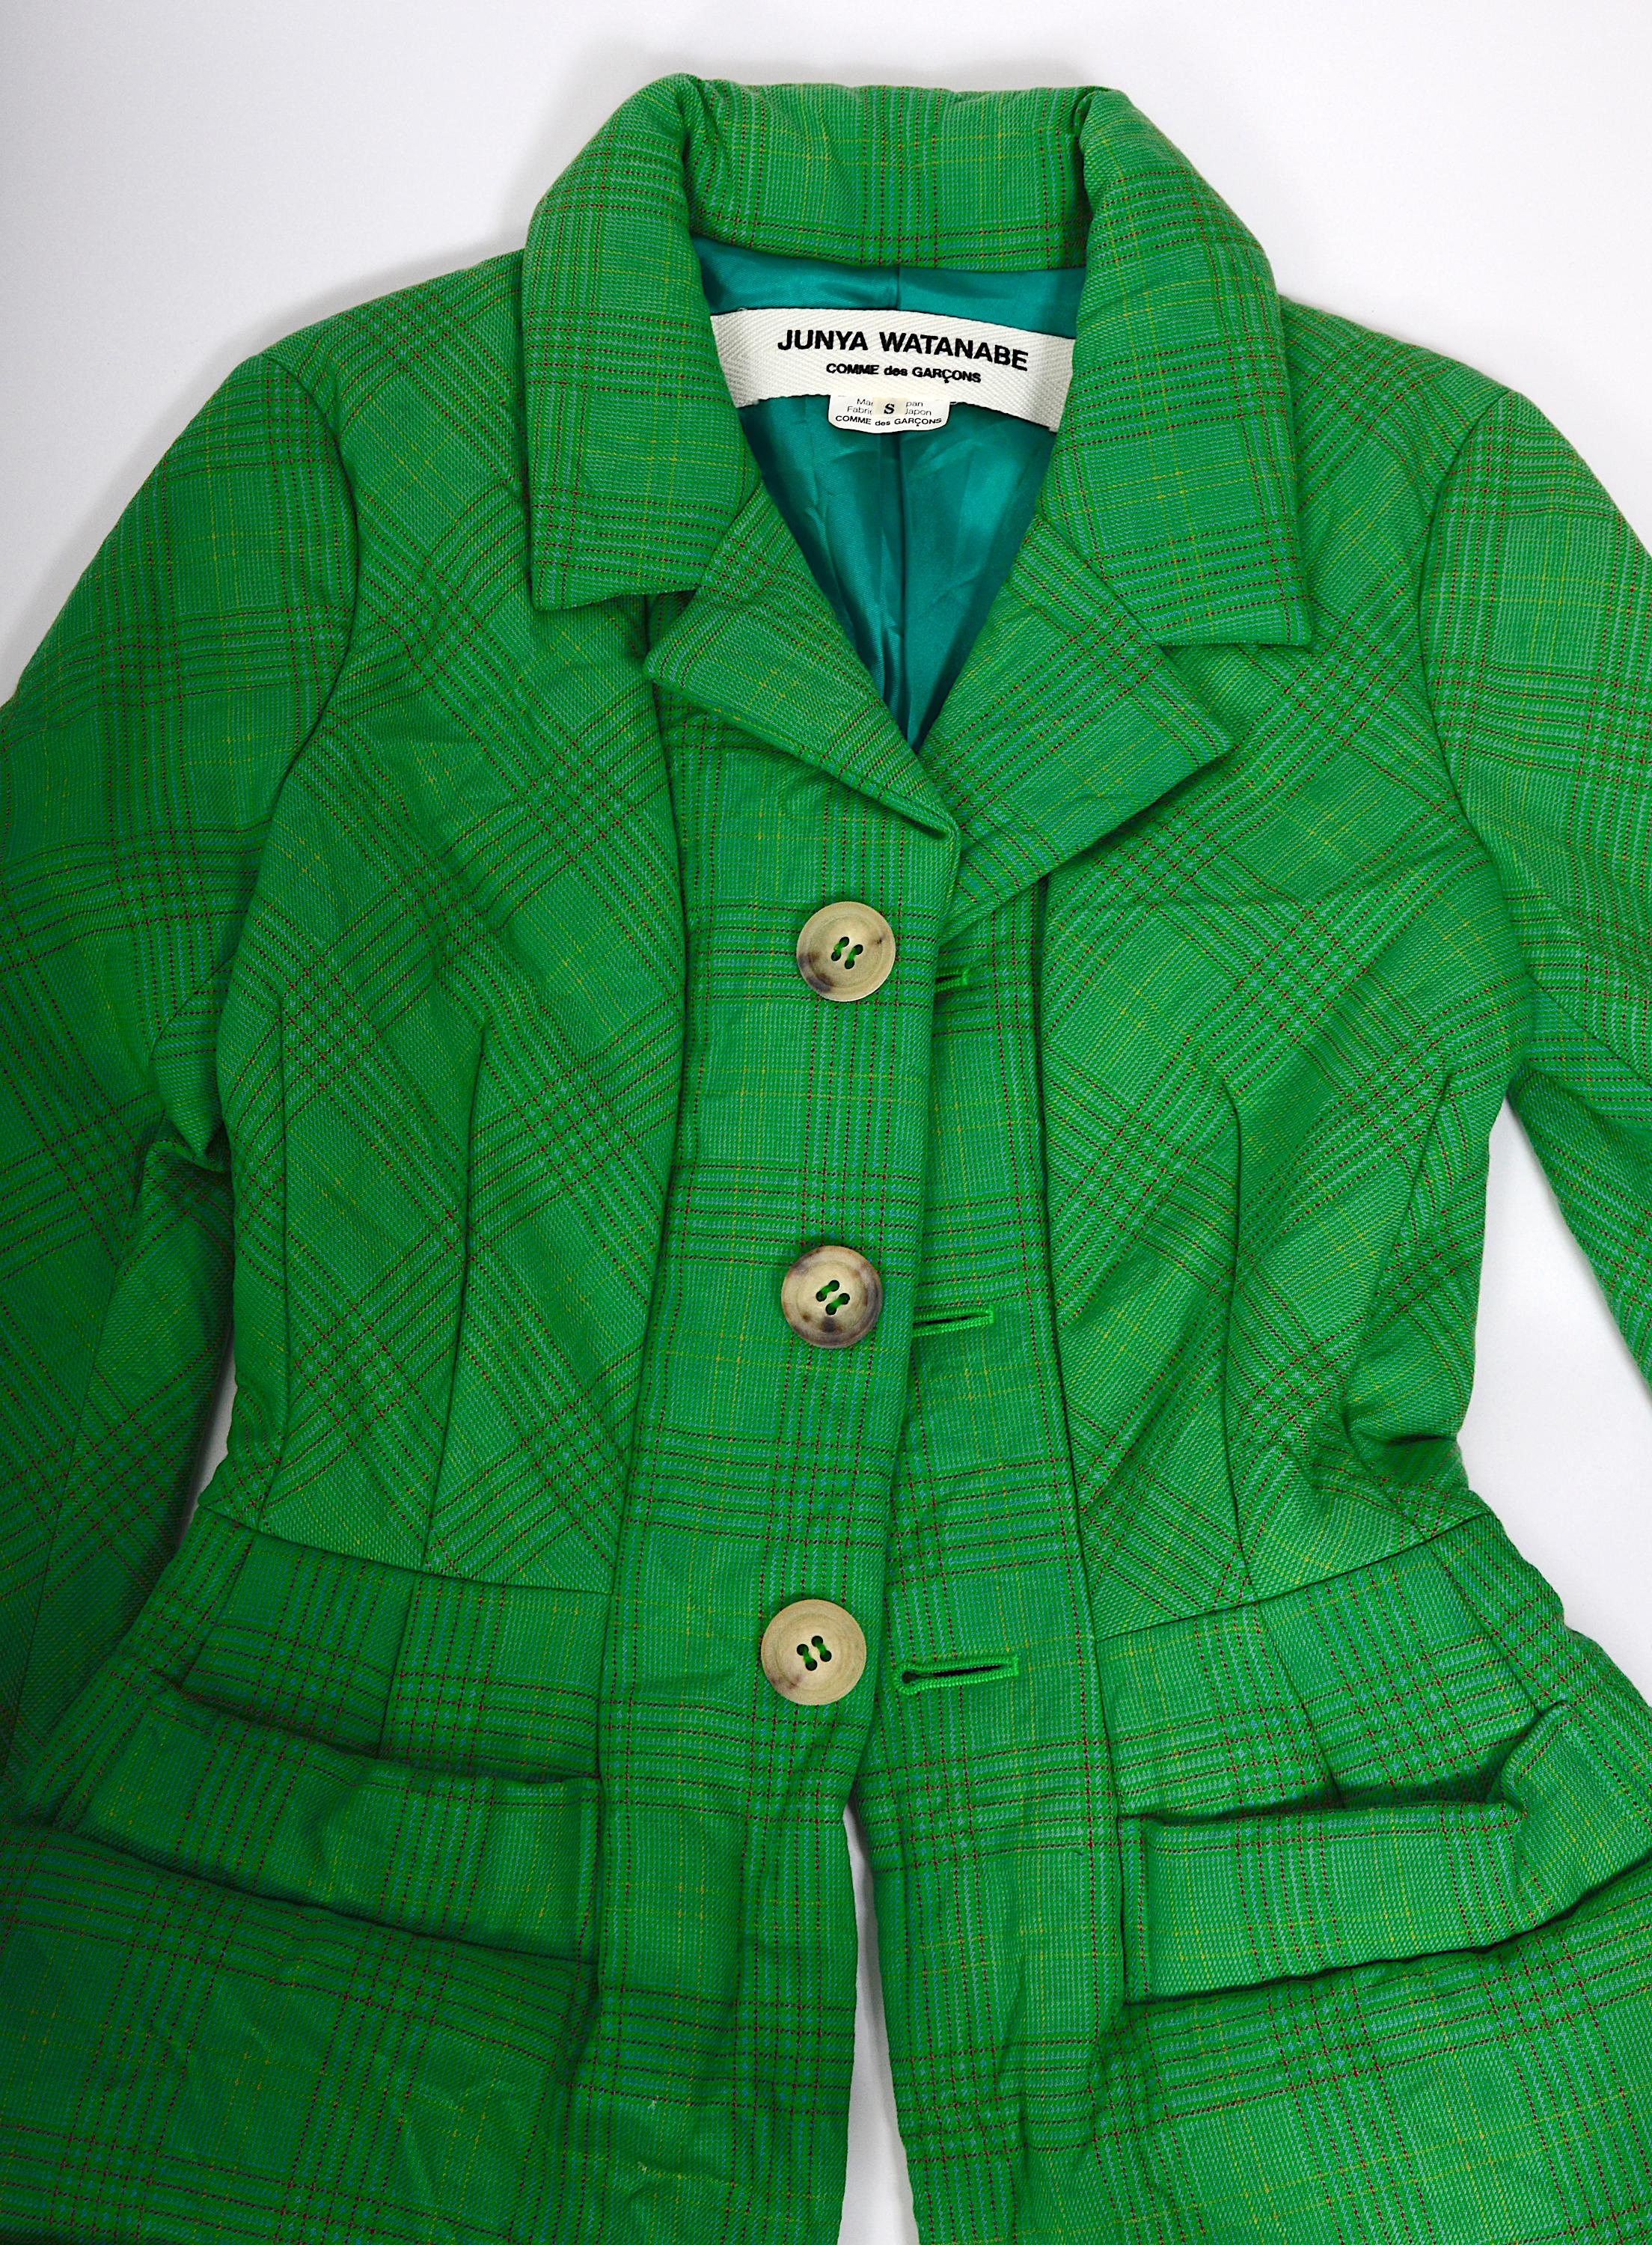 Comme des Garçons by Junya Watanabe vintage FW 2004 green padded basque jacket   For Sale 8